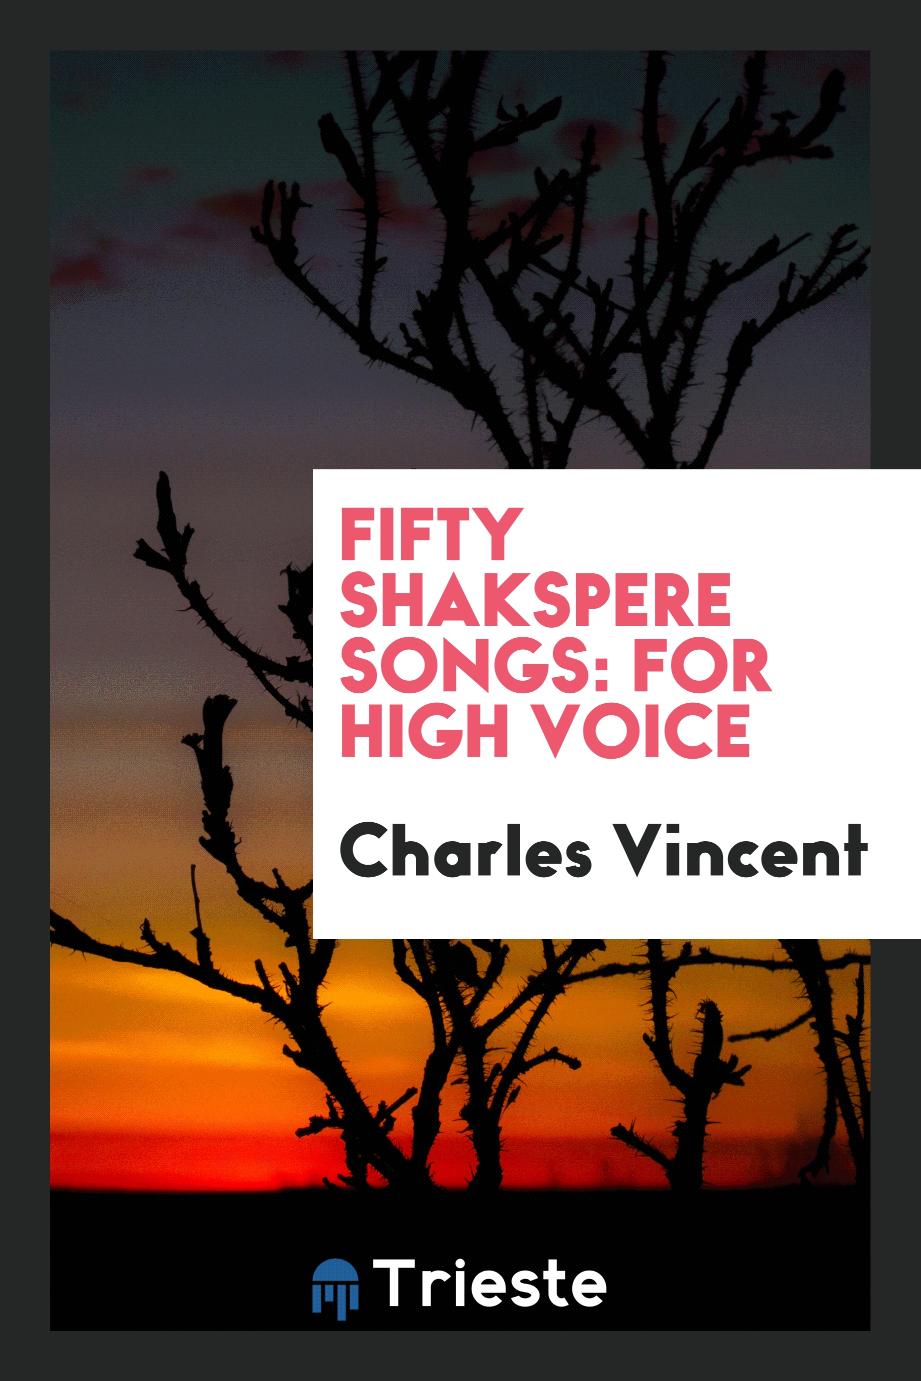 Fifty Shakspere songs: for high voice